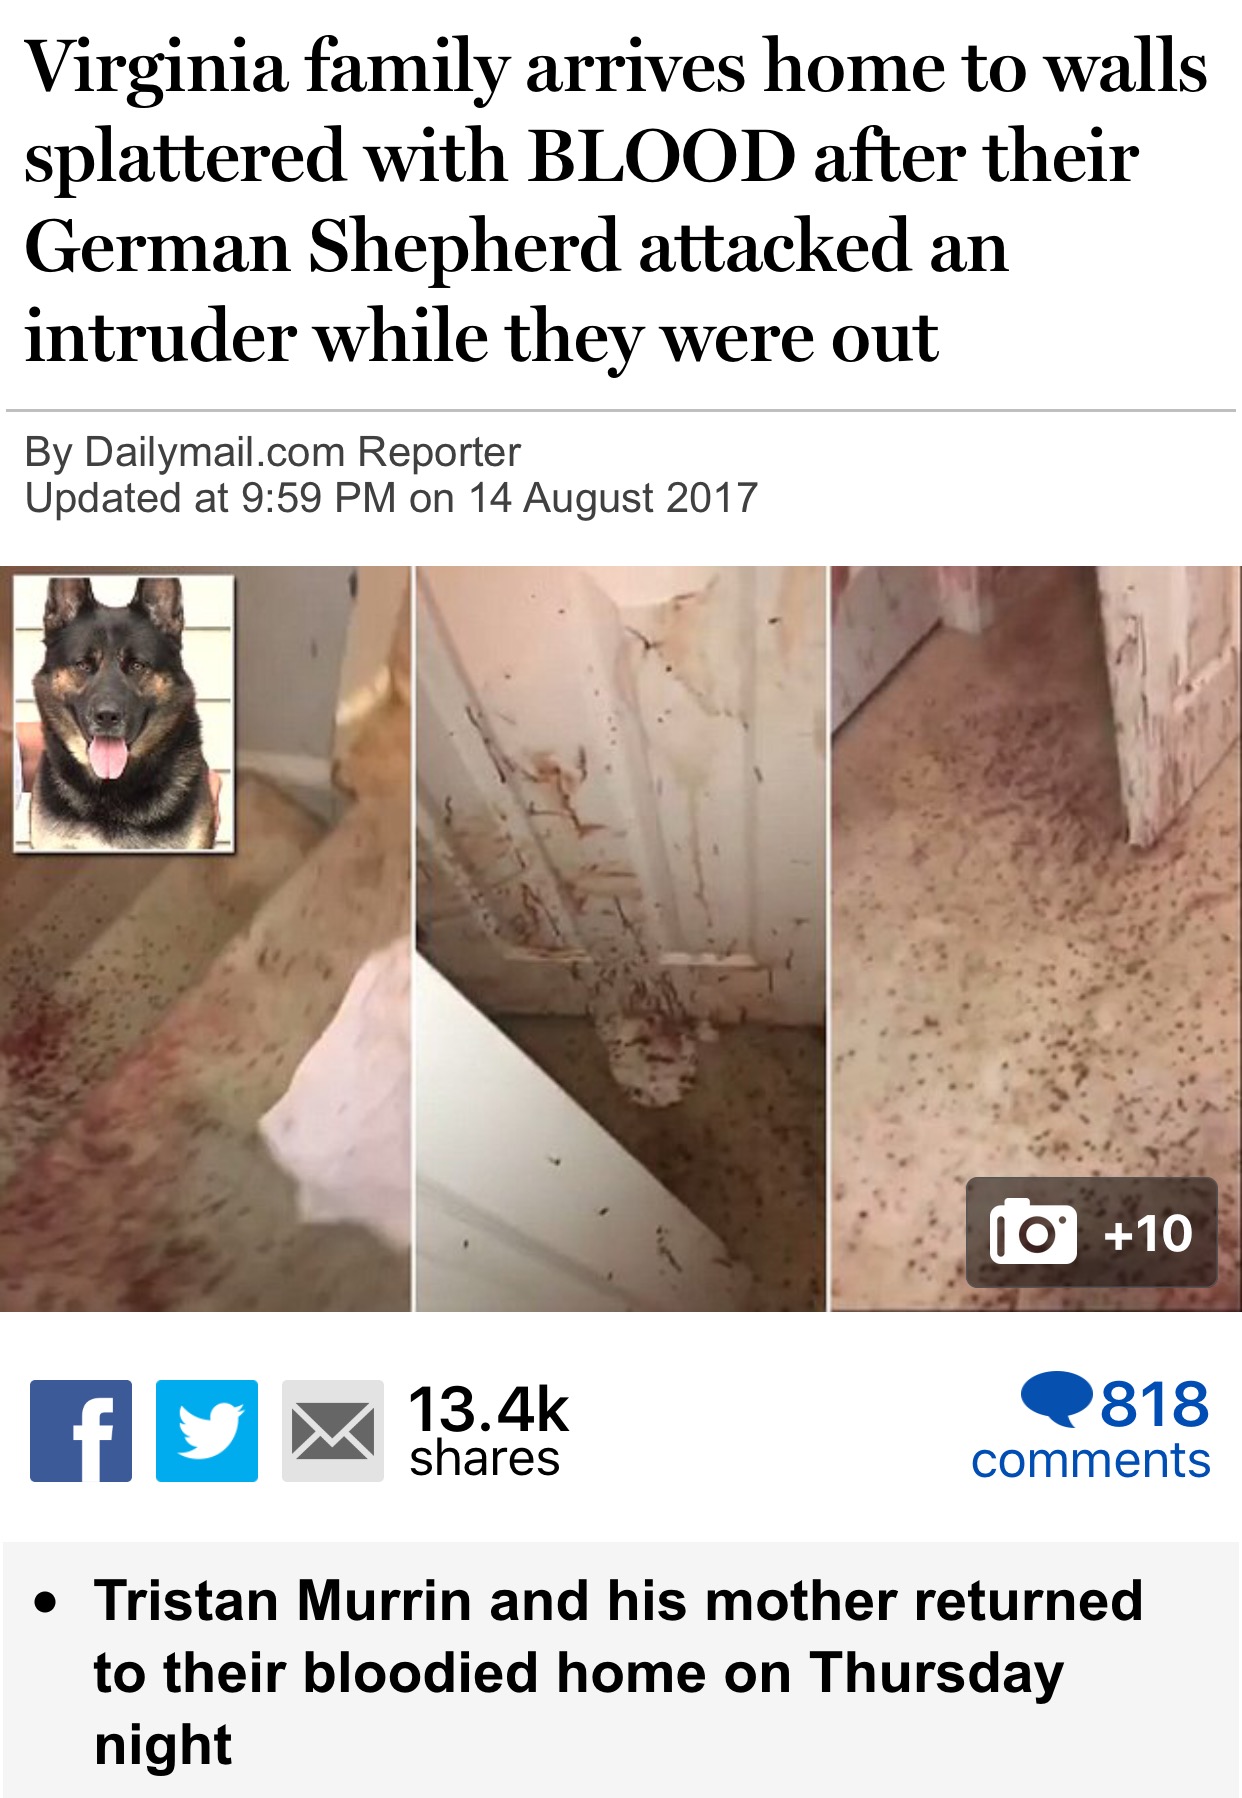 floor - Virginia family arrives home to walls splattered with Blood after their German Shepherd attacked an intruder while they were out By Dailymail.com Reporter Updated at on 10 10 fyrir Q 818 Tristan Murrin and his mother returned to their bloodied hom